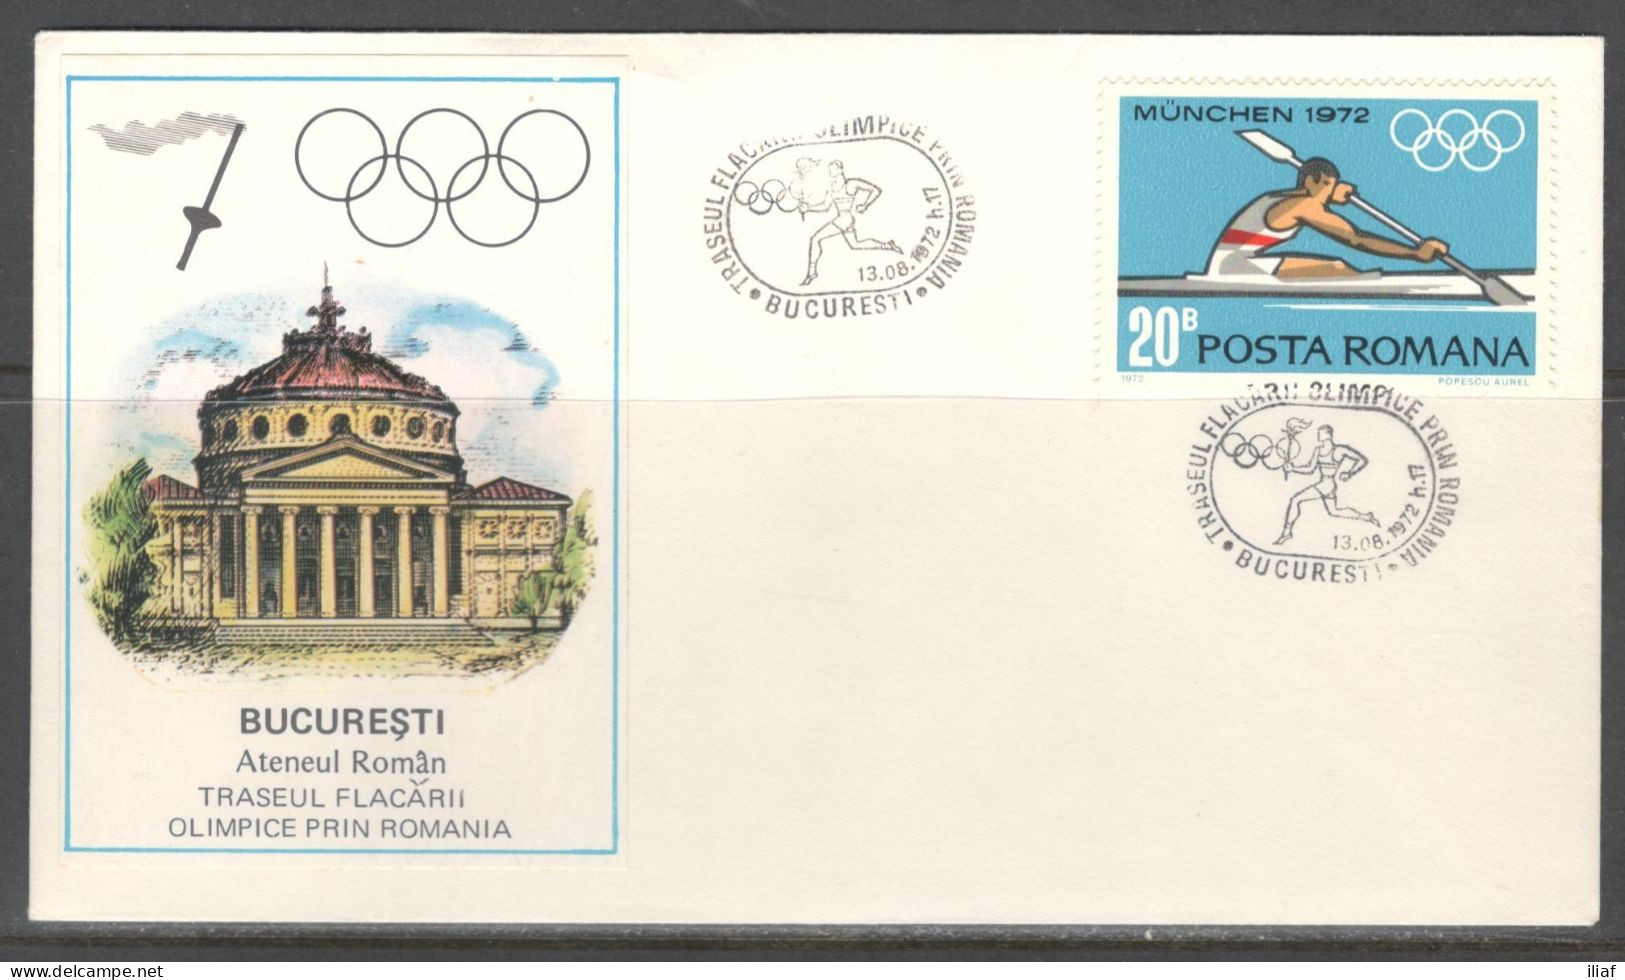 Romania. The Journey Of The Torch For The XX Munich Olympics 1972. Bucuresti, 13.08.1972  Special Cancellation - Covers & Documents